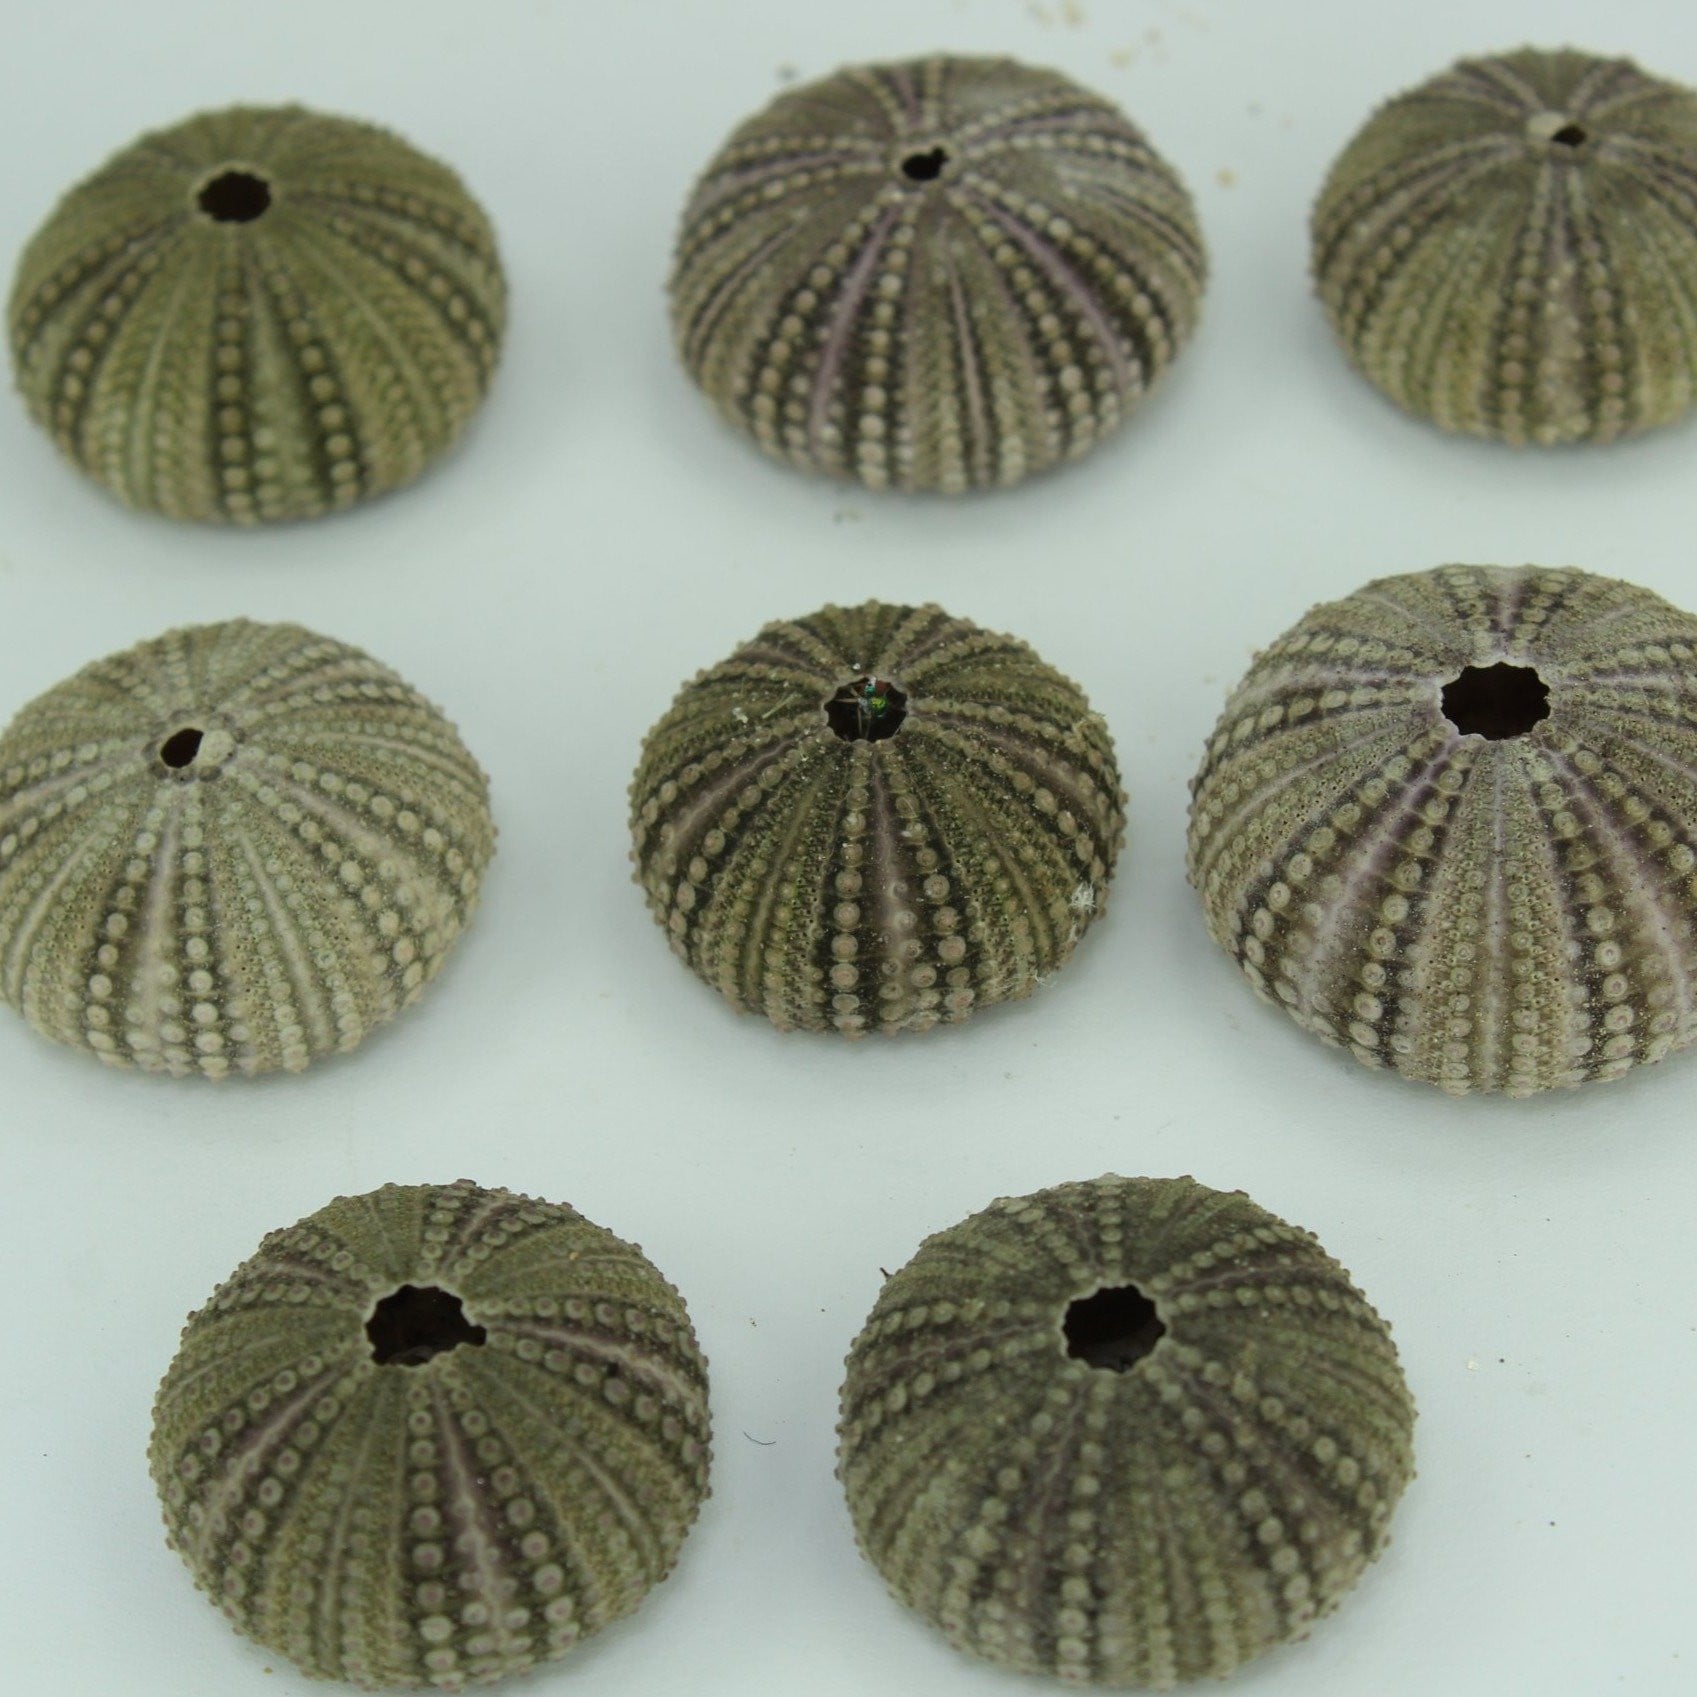 Florida Natural 8 Baby Sea Urchins Estate Collection Jewelry Shell Art Collectibles mini